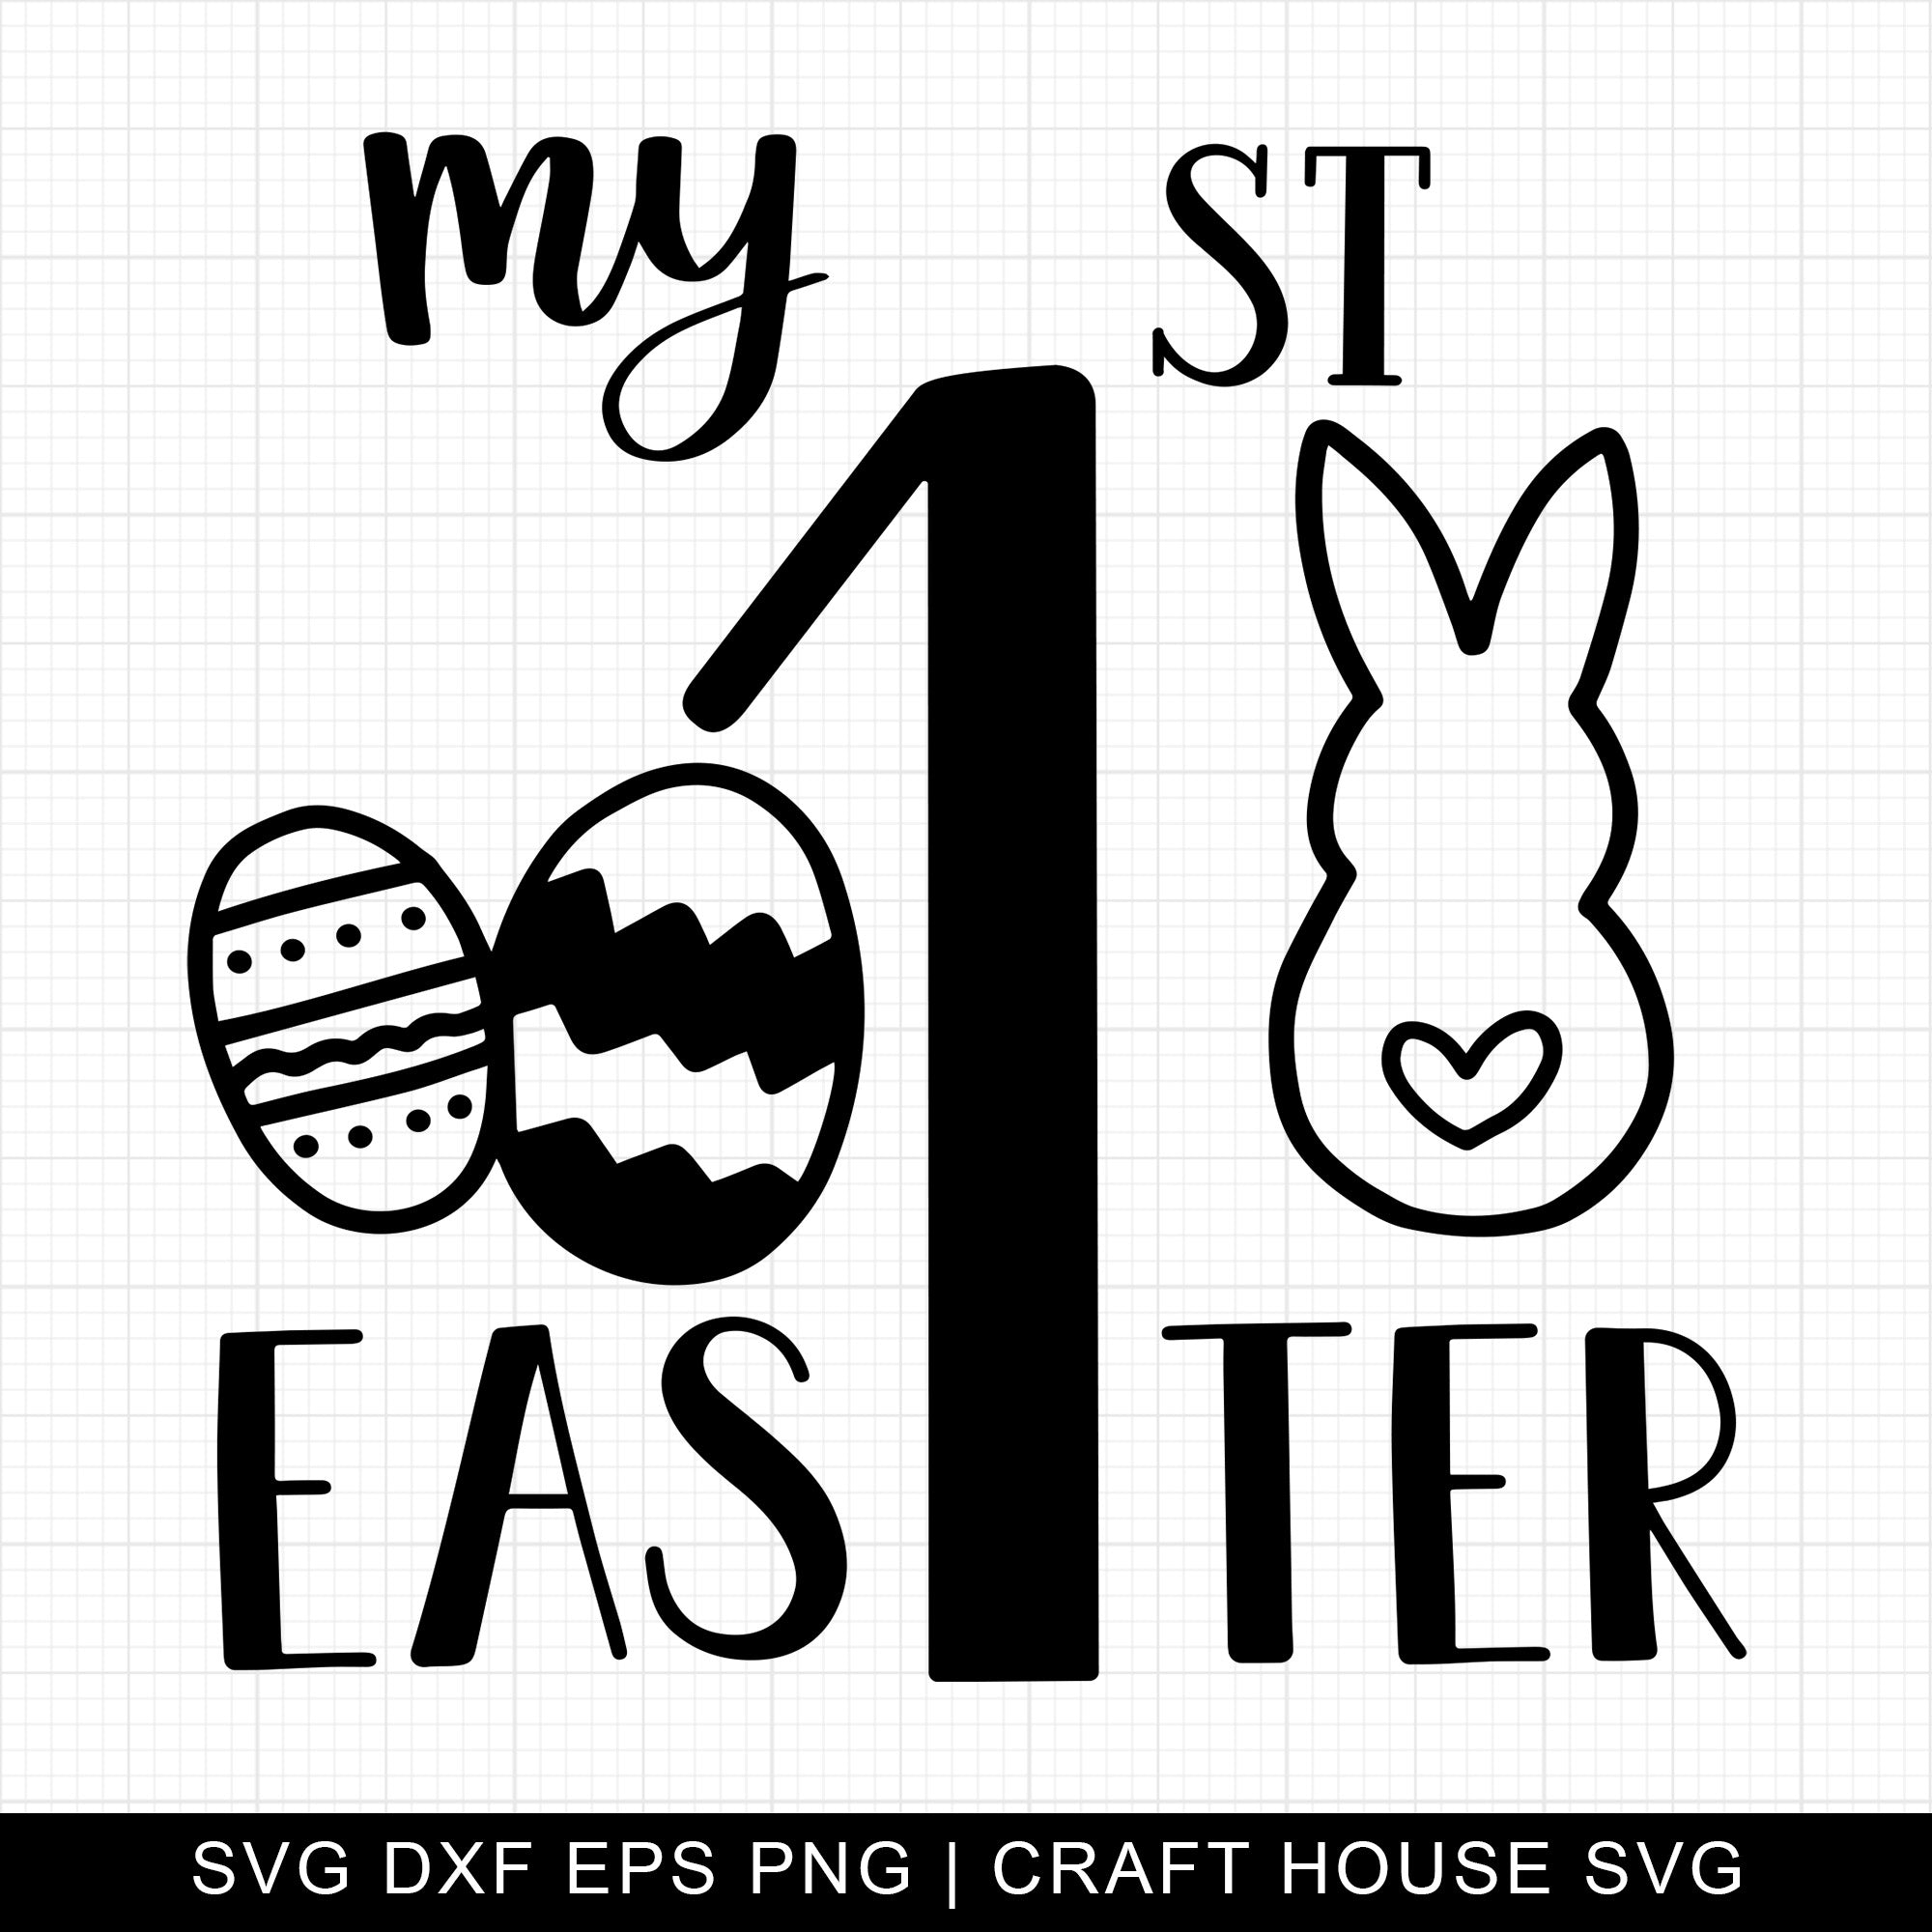 My 1st Easter SVG | M9F9